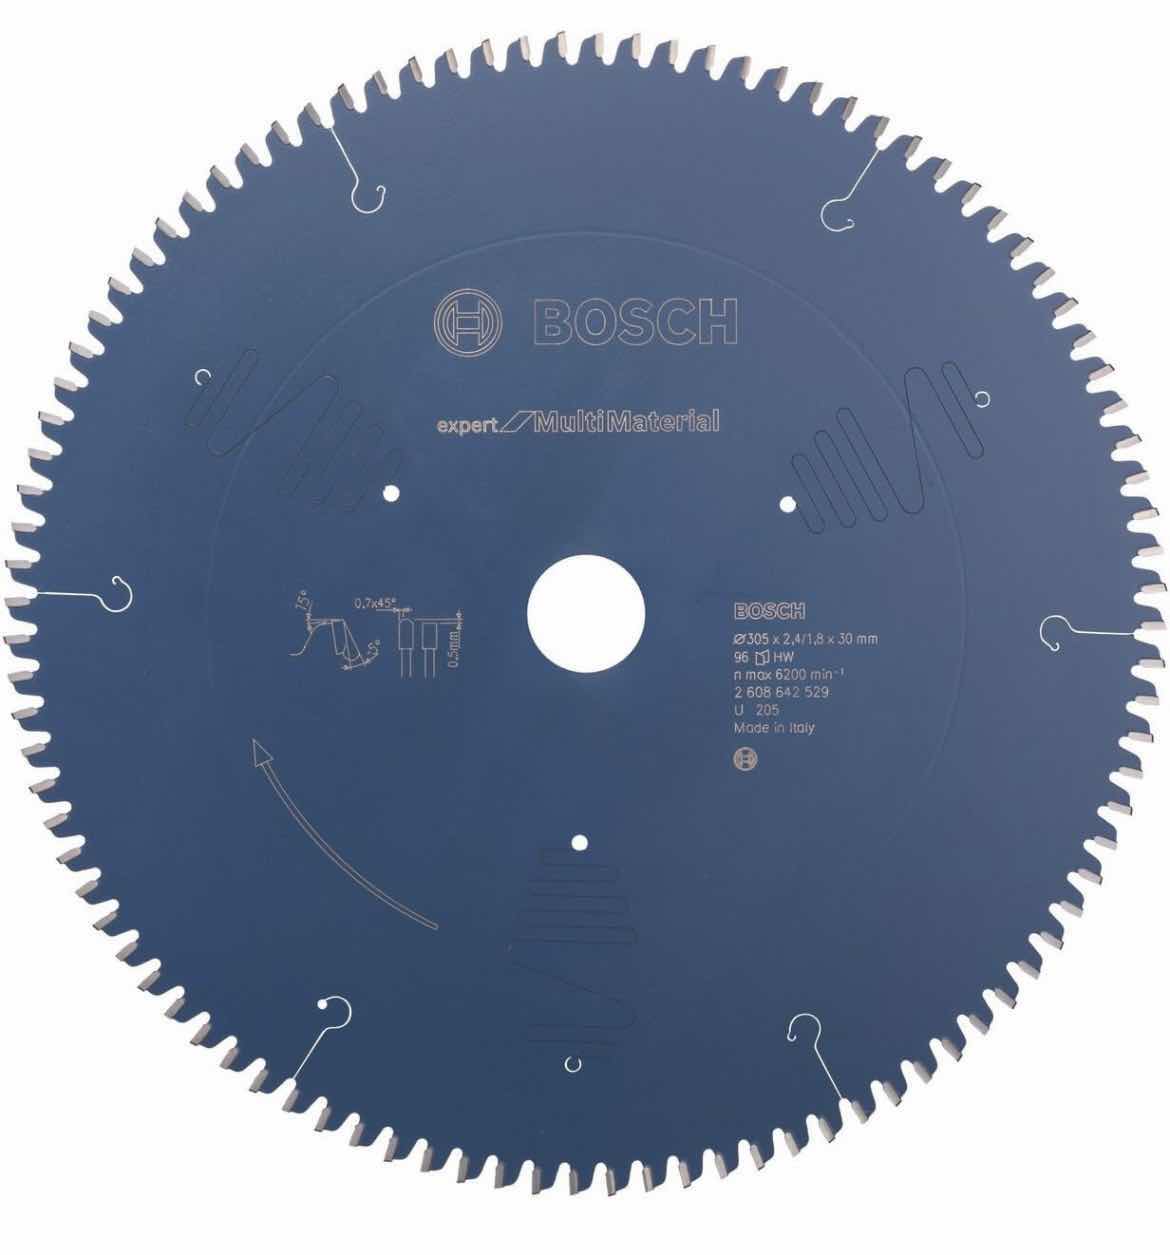 Photo 1 of BOSCH 2608642529 EXPERT FOR MULTI MATERIAL CIRCULAR SAW BLADE